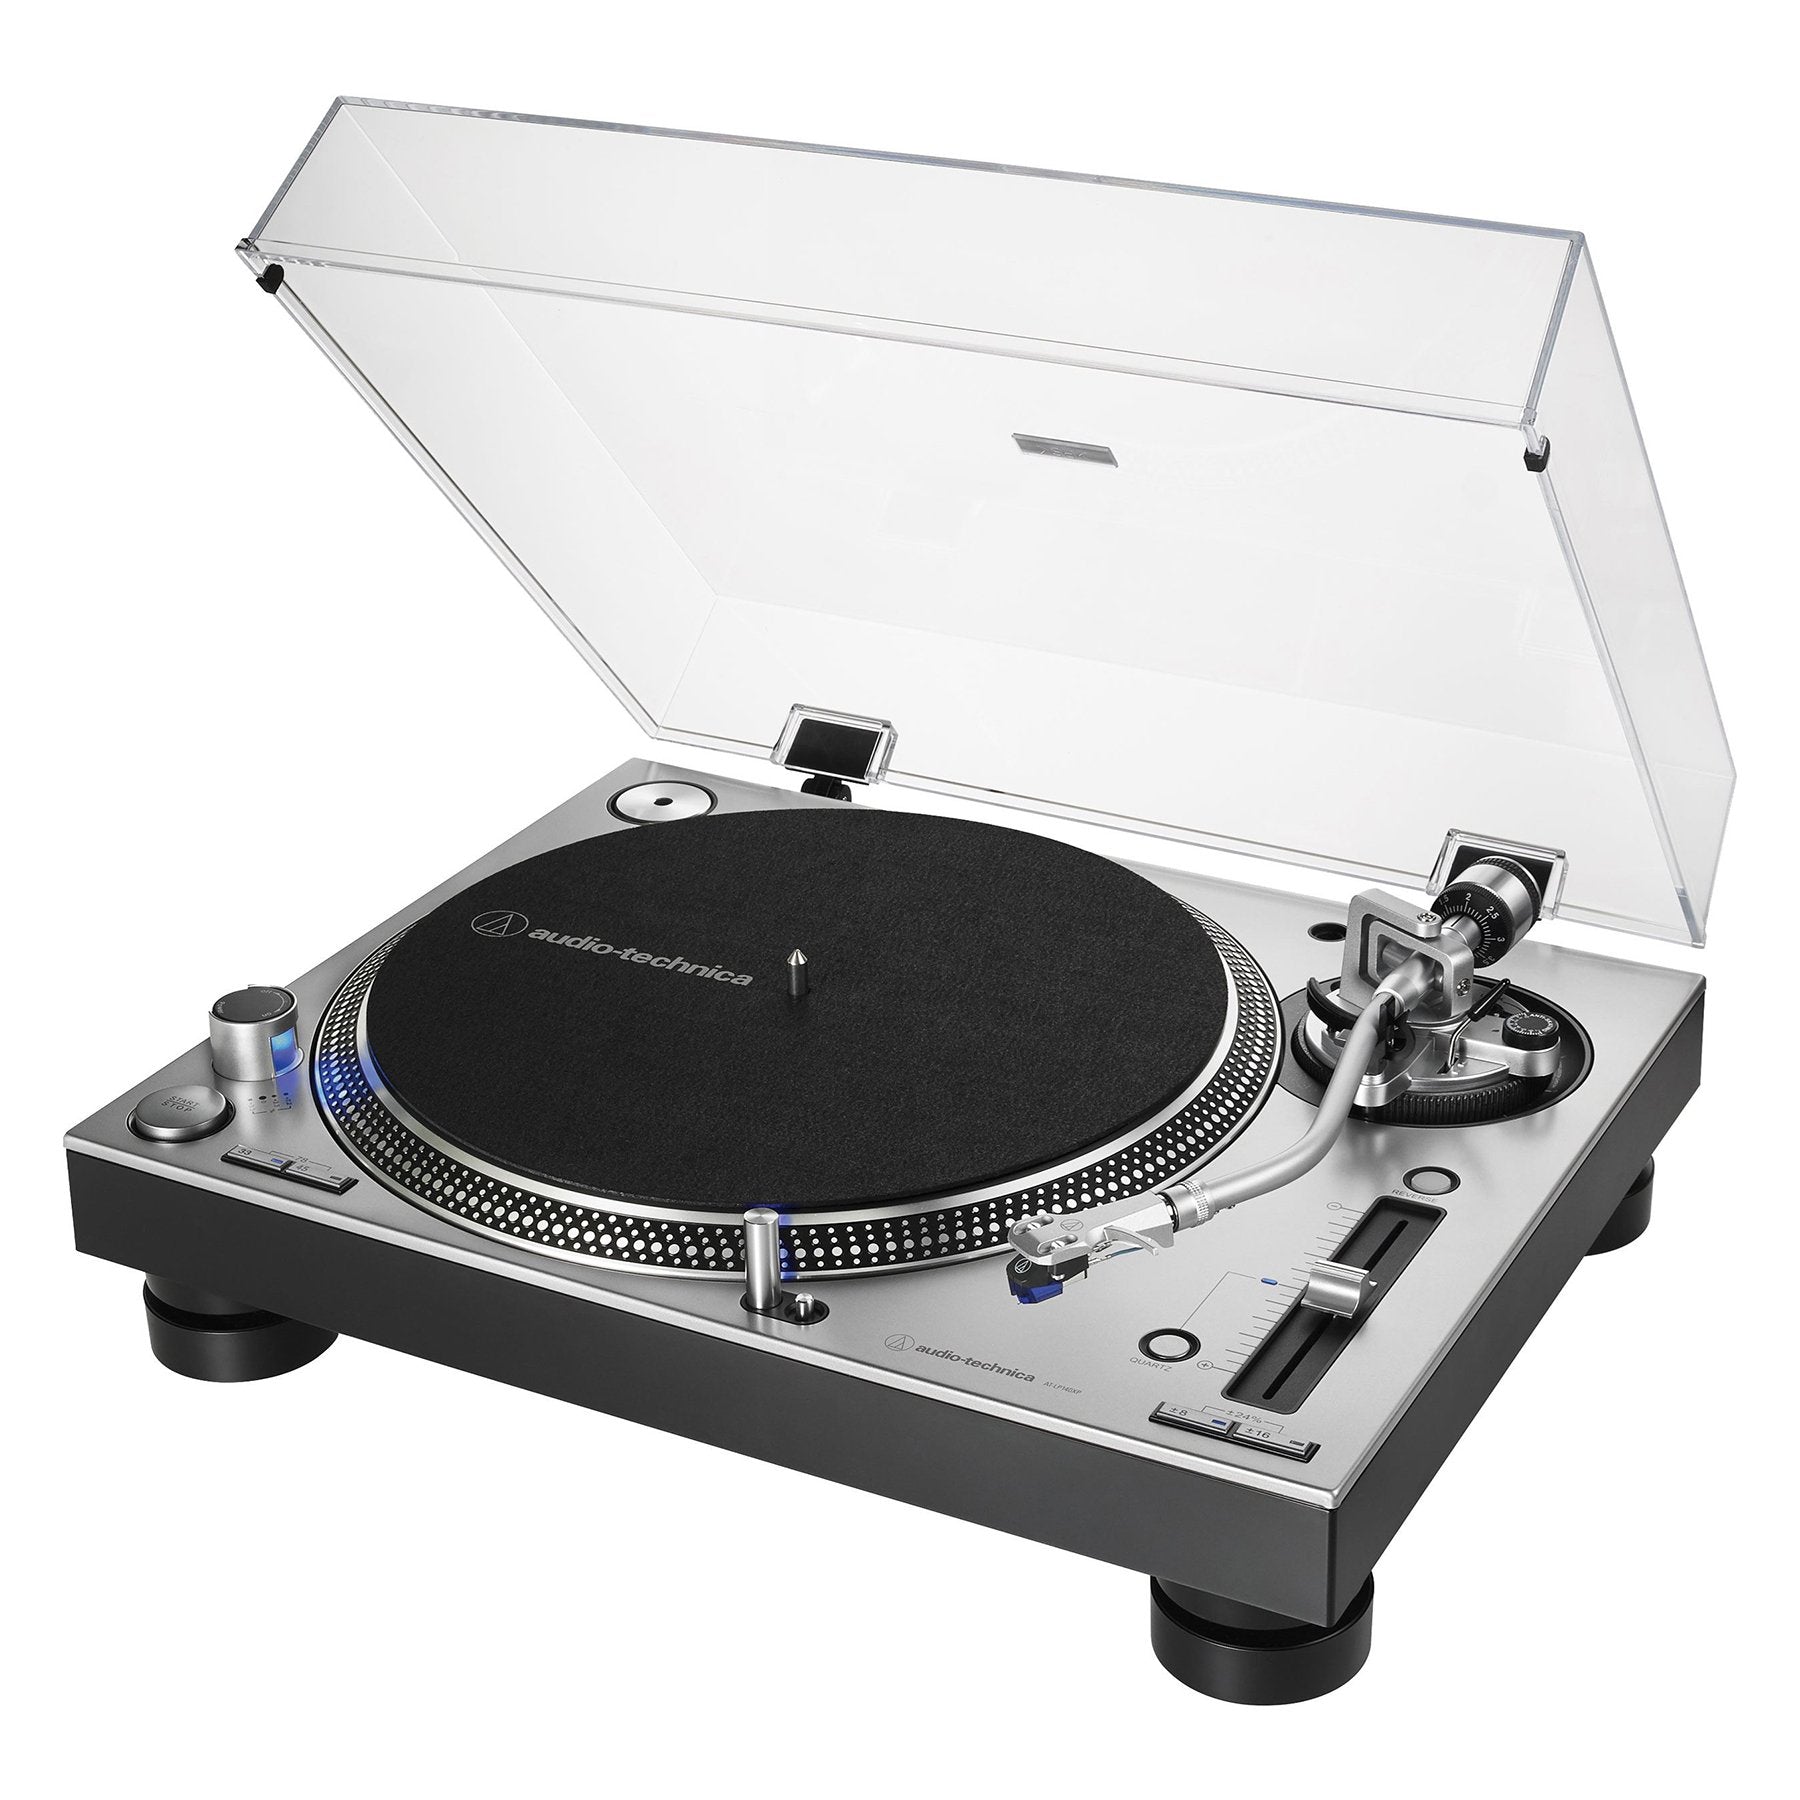 Audio Technica: AT-LP140XP-SV Direct Drive DJ Turntable - Silver